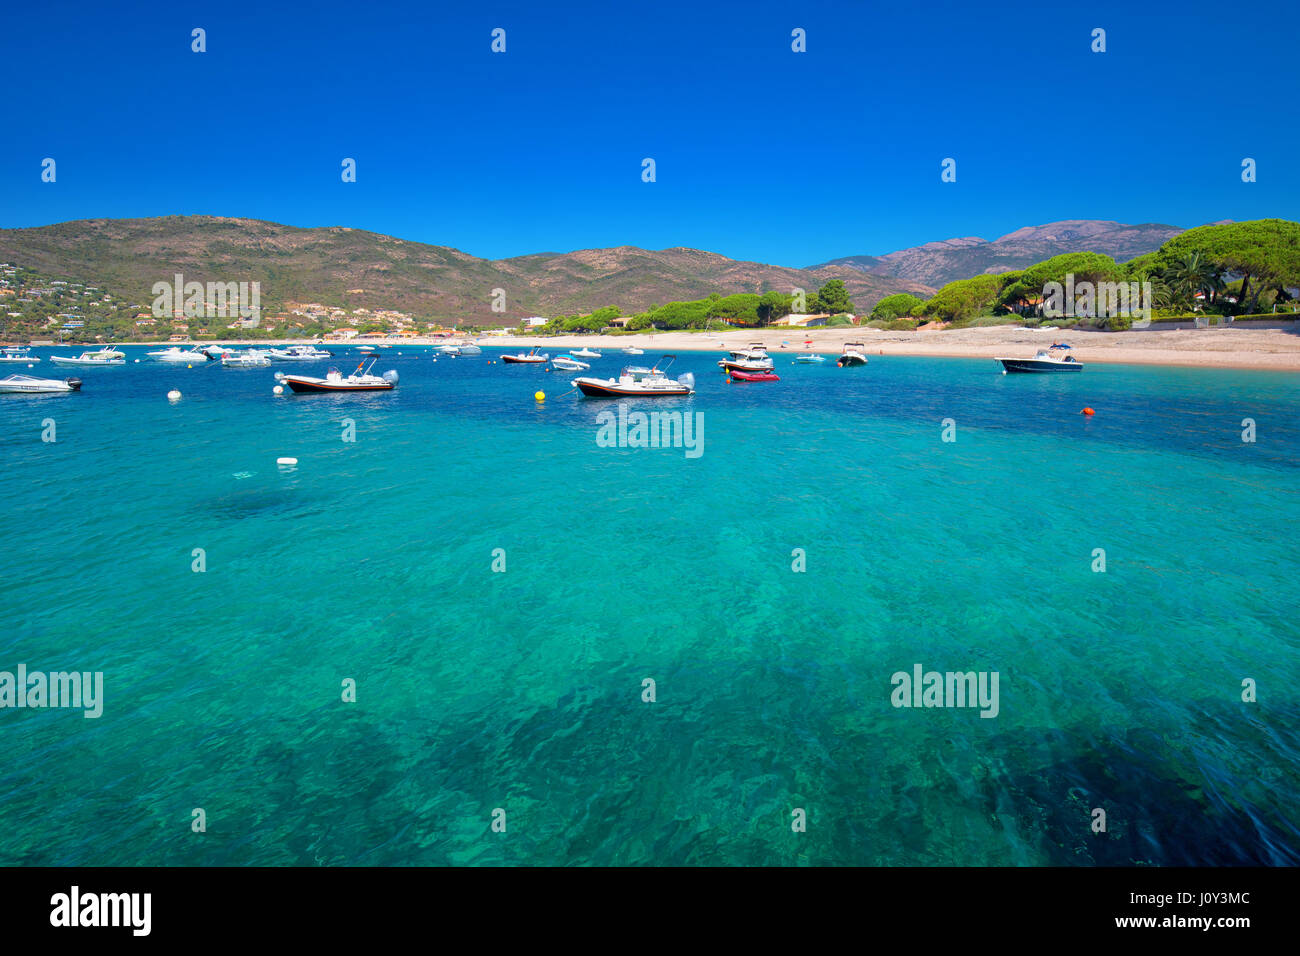 PORTICCIO,CORSICA, FRANCE - August 2016 - Mediteranian Corsica island with pine trees, sandy beach, tourquise clear water and yachts in bay, Corsica,  Stock Photo